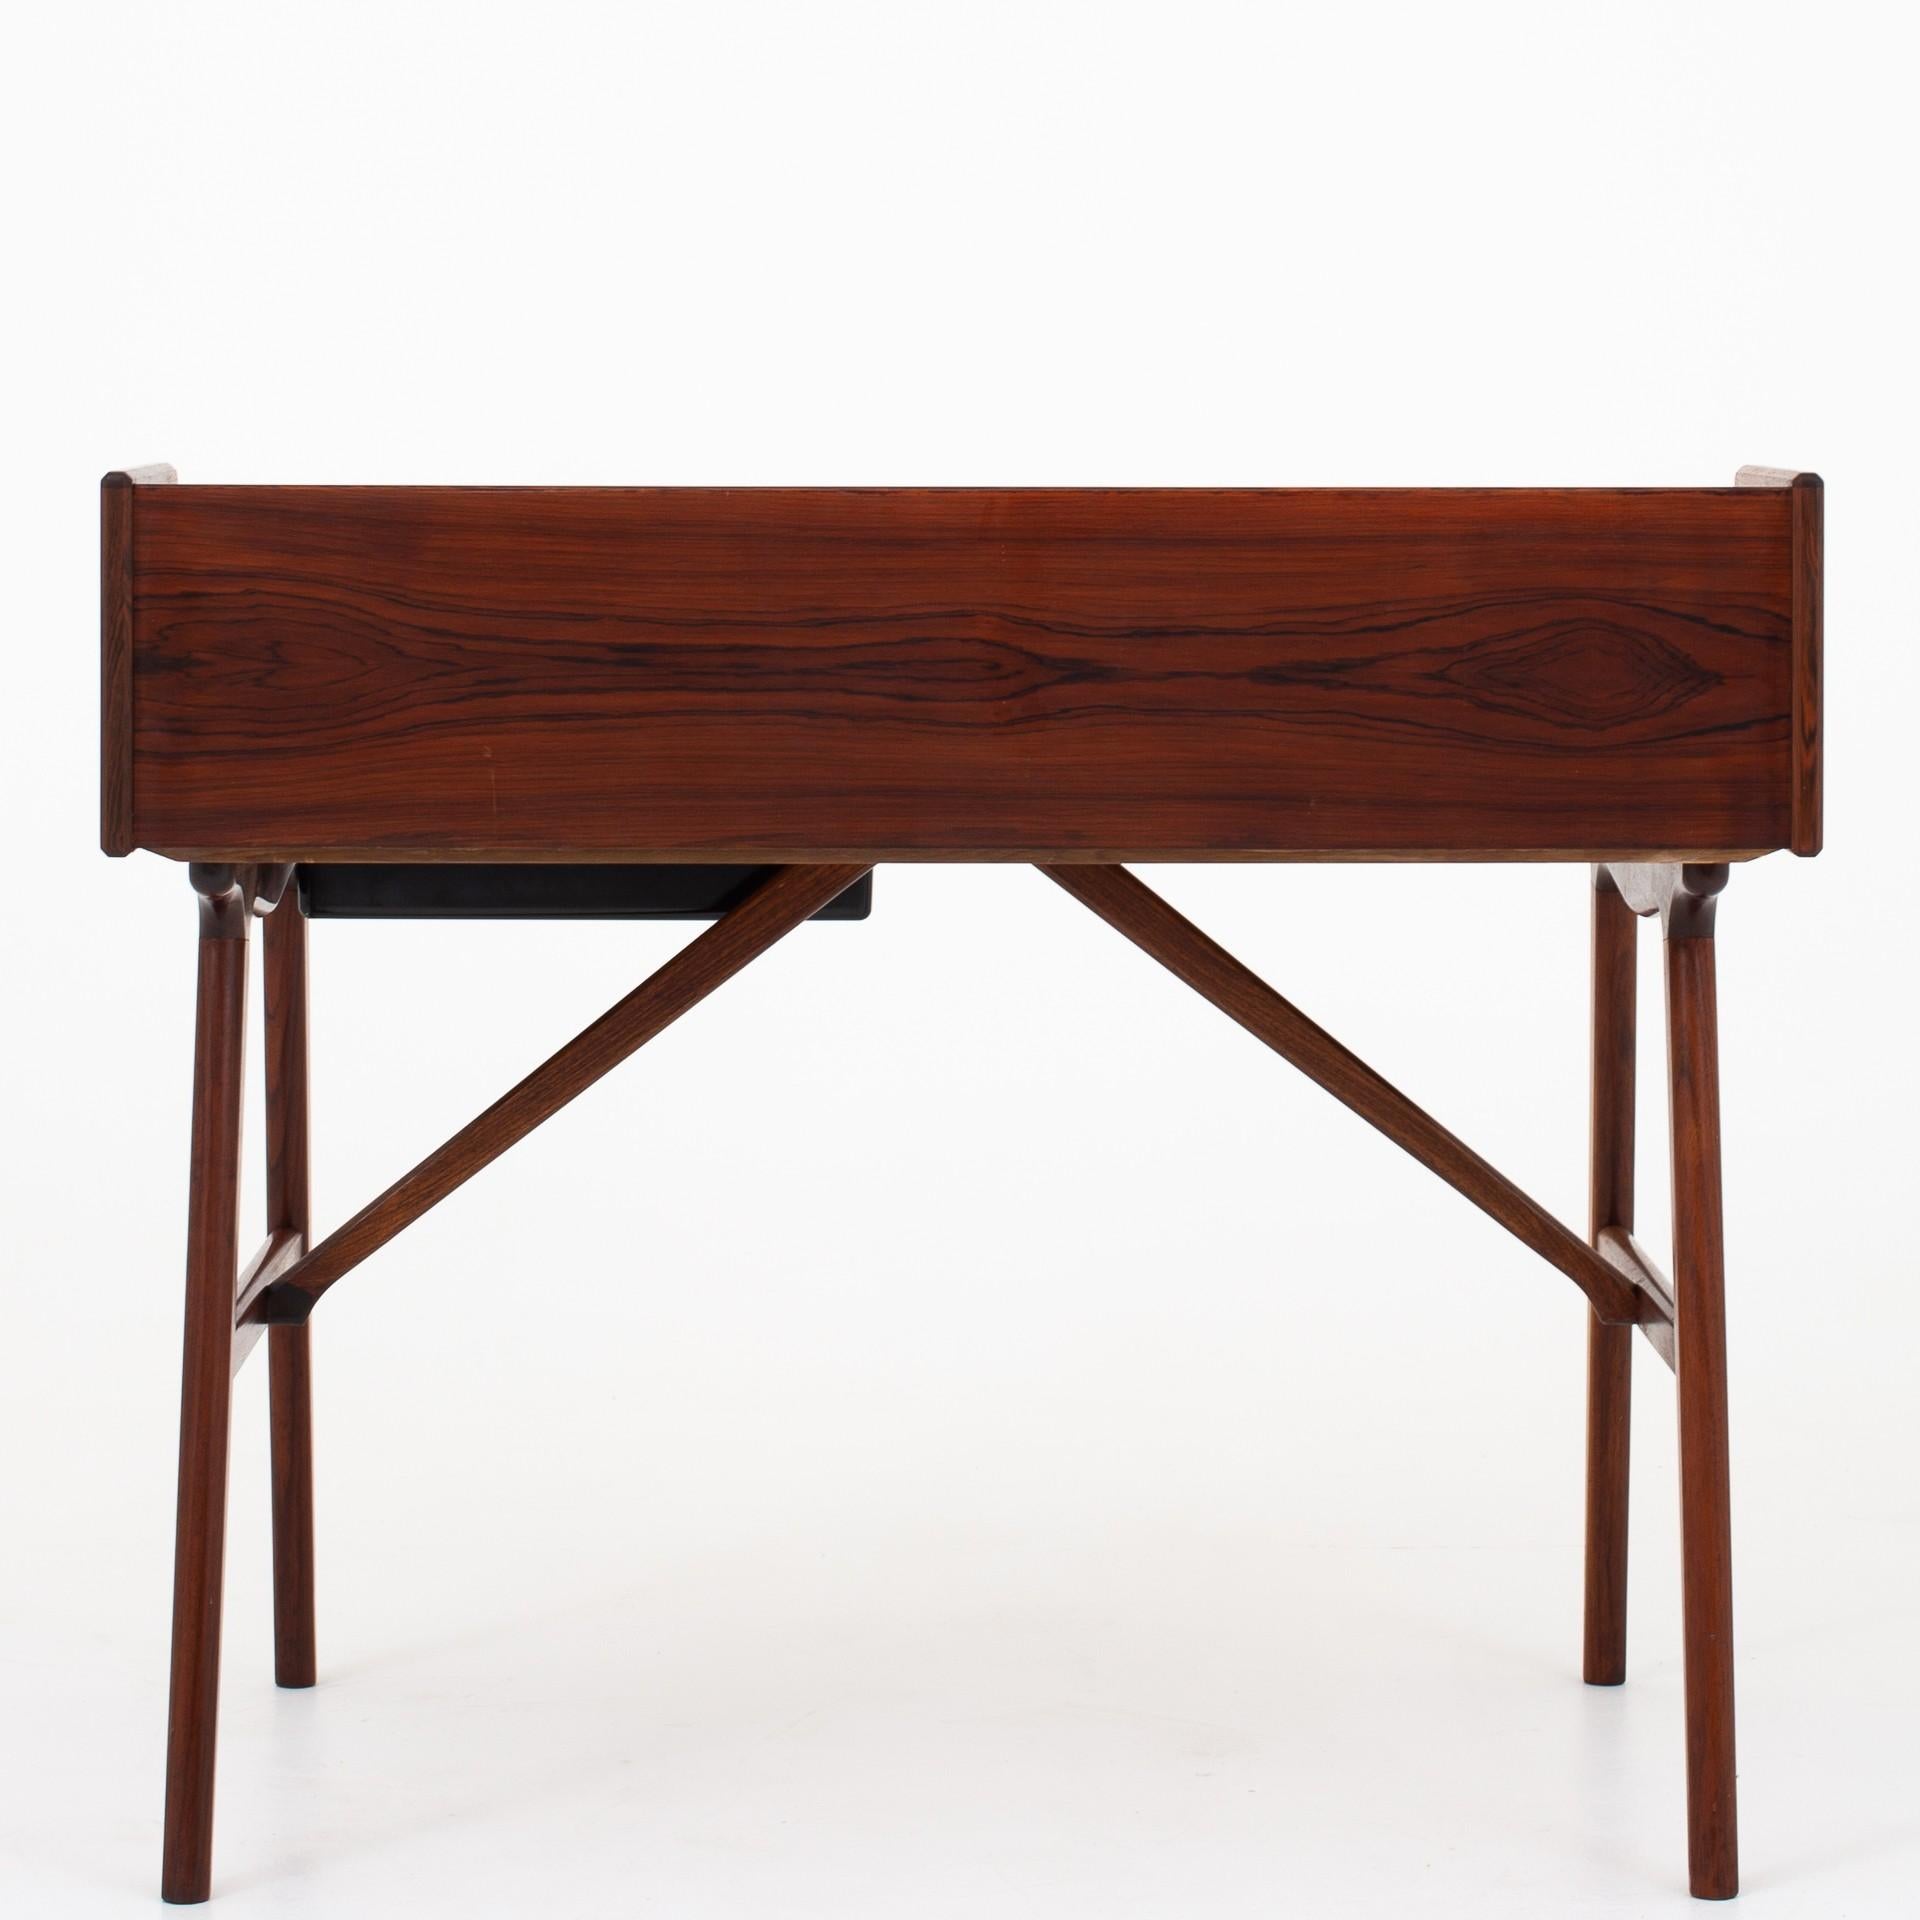 Desk or dressing table in rosewood with drawers, flap and mirror. Model 64. Maker Vinde Møbelfabrik.